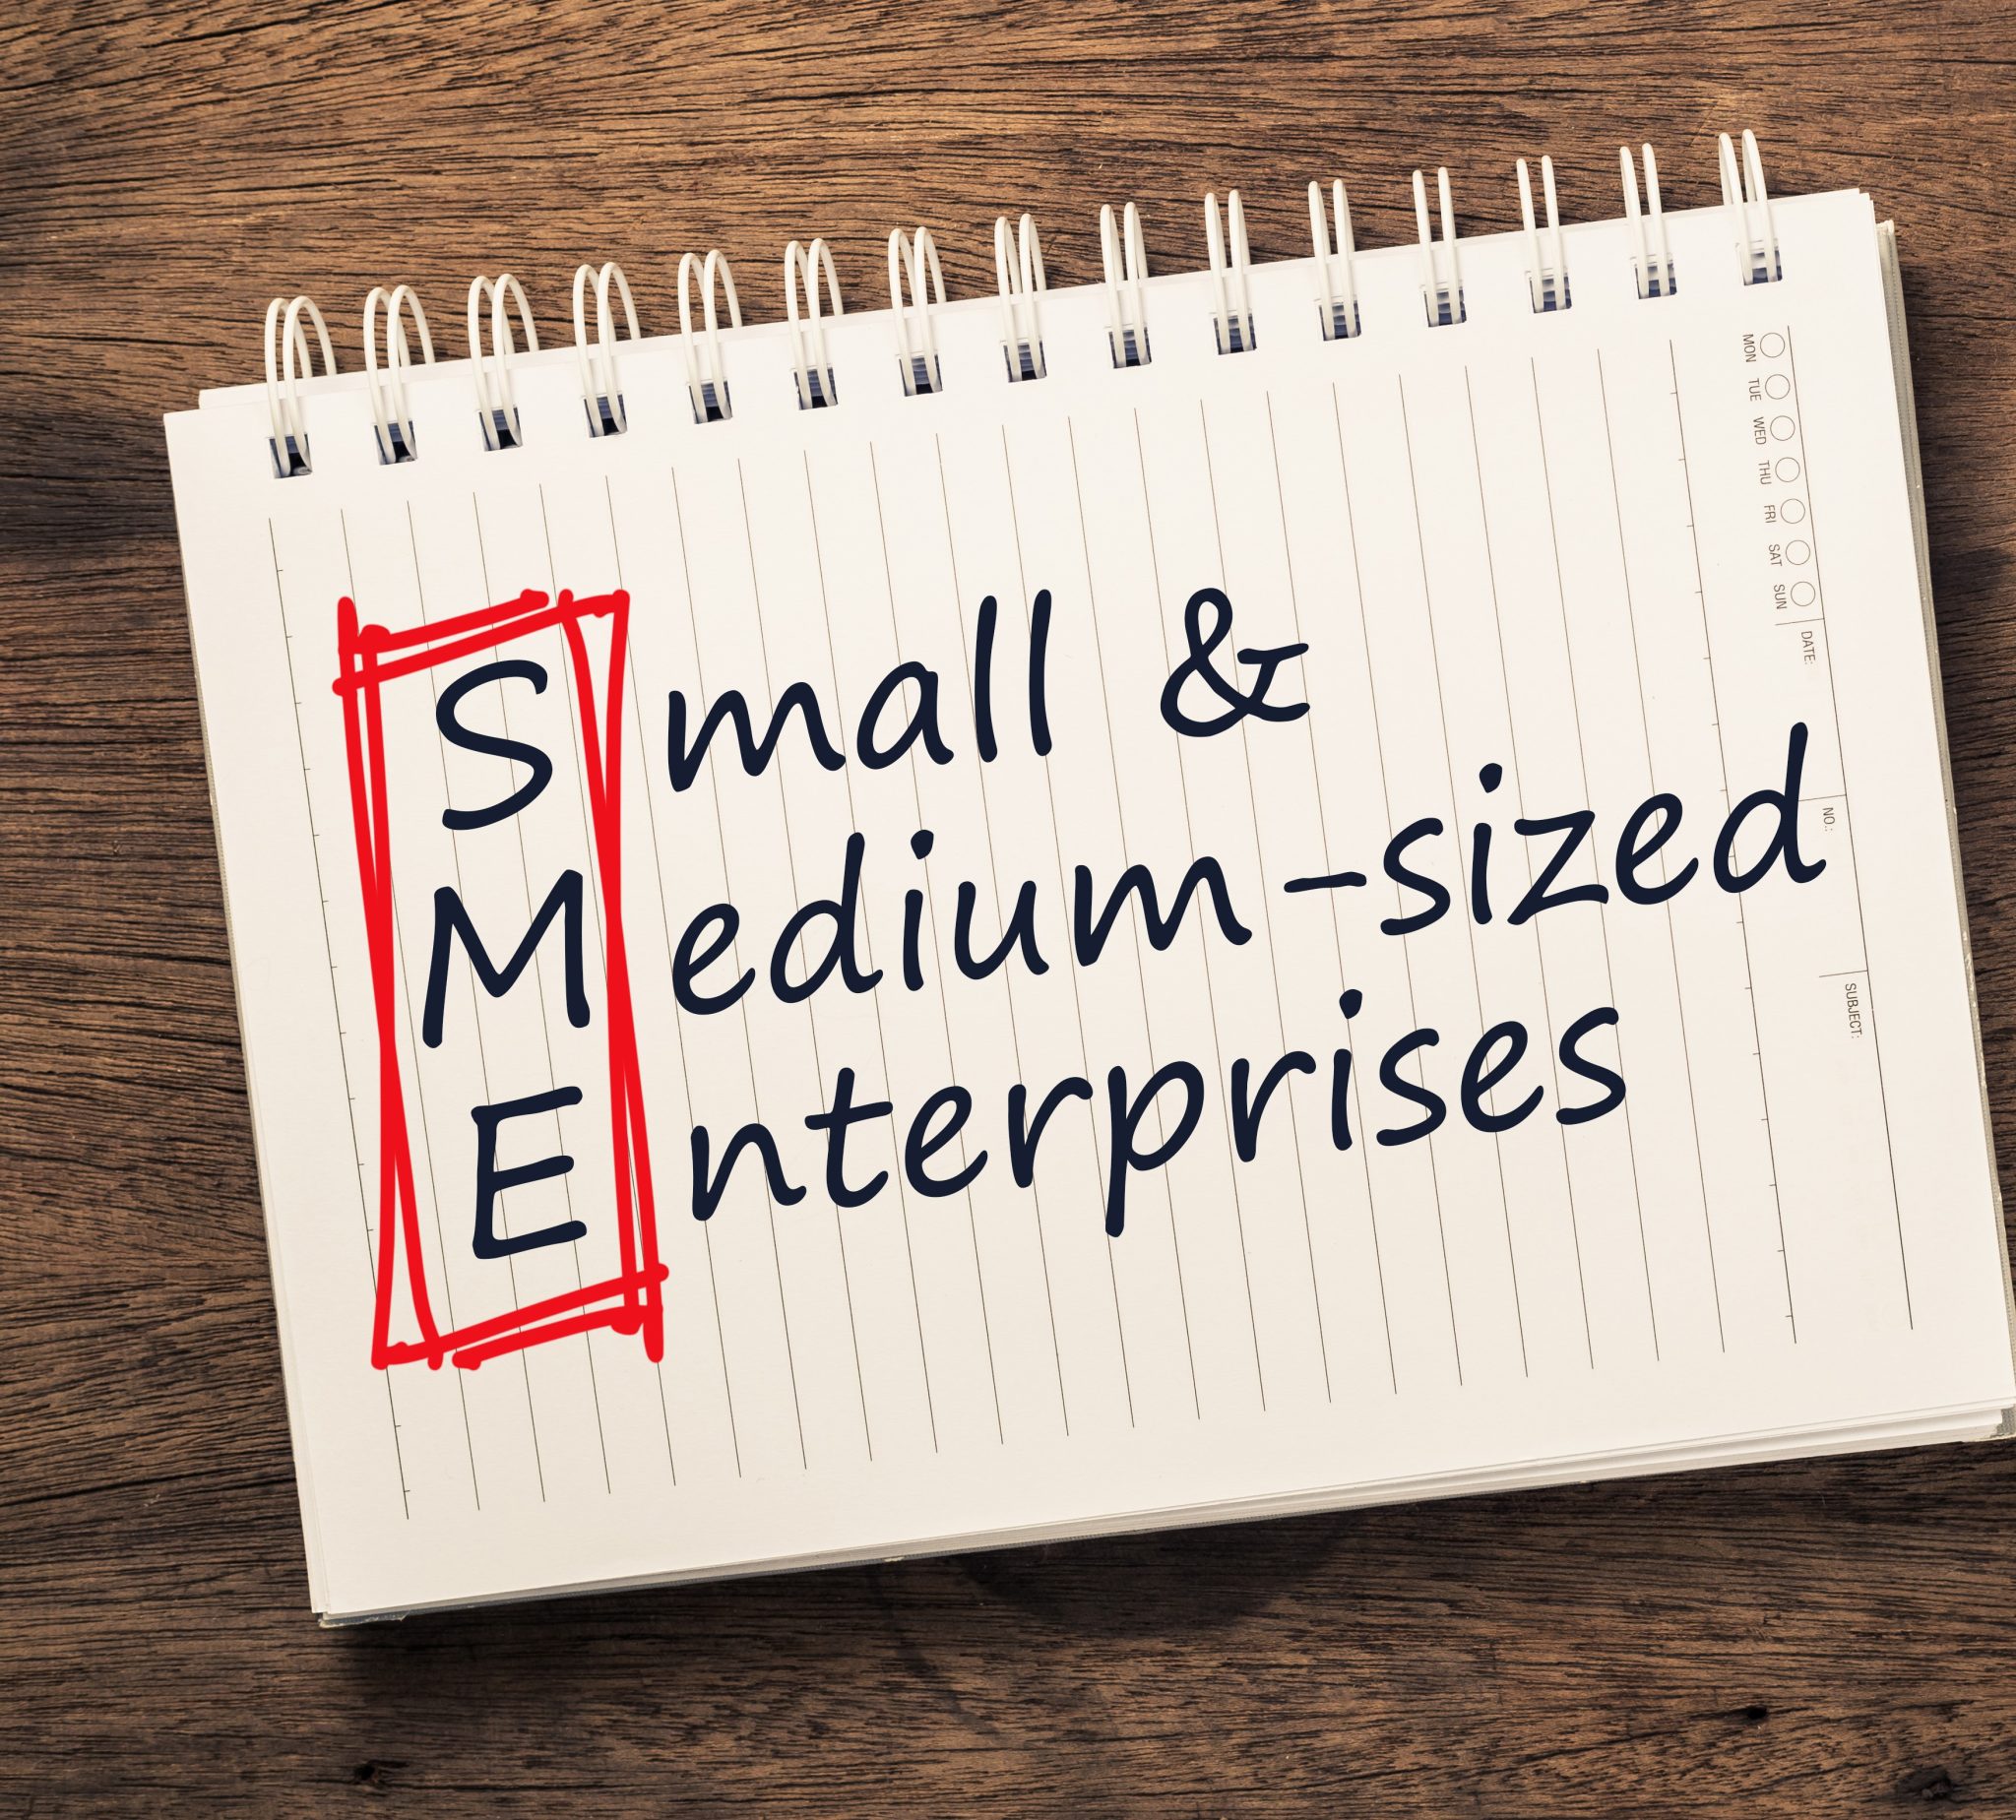 Govt. proposes financial aid package for MSMEs